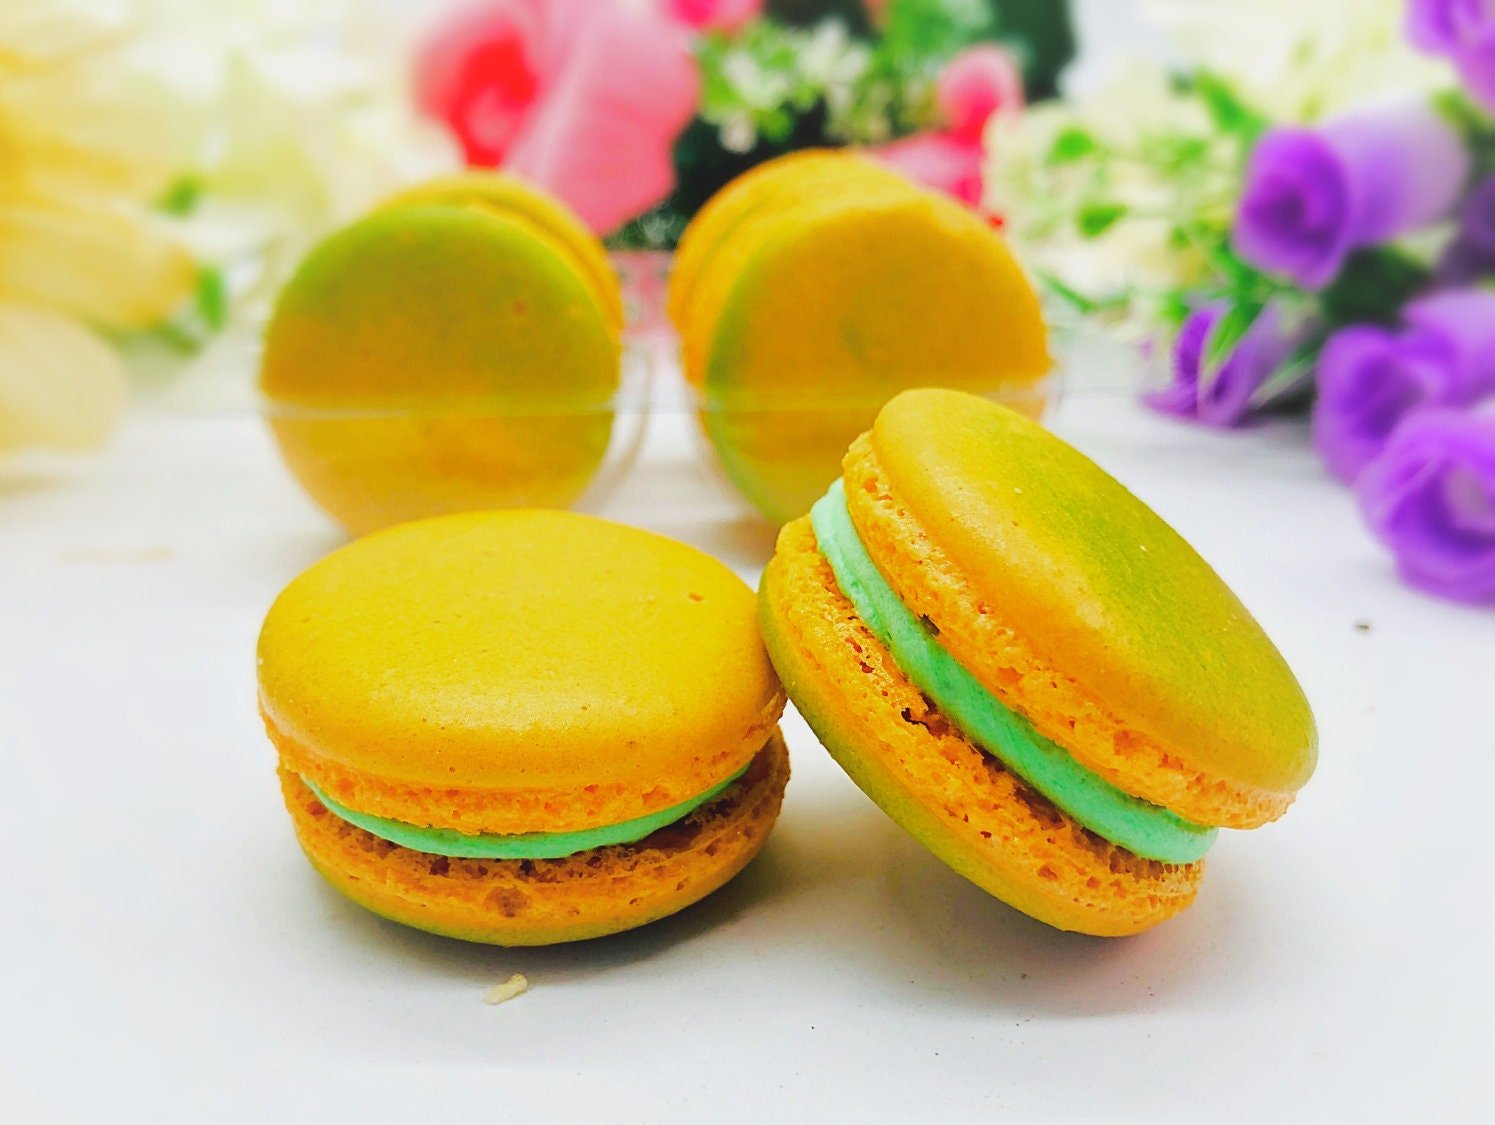 6 Pack Mango French Macarons | Perfect for your next celebratory events. - Macaron Centrale